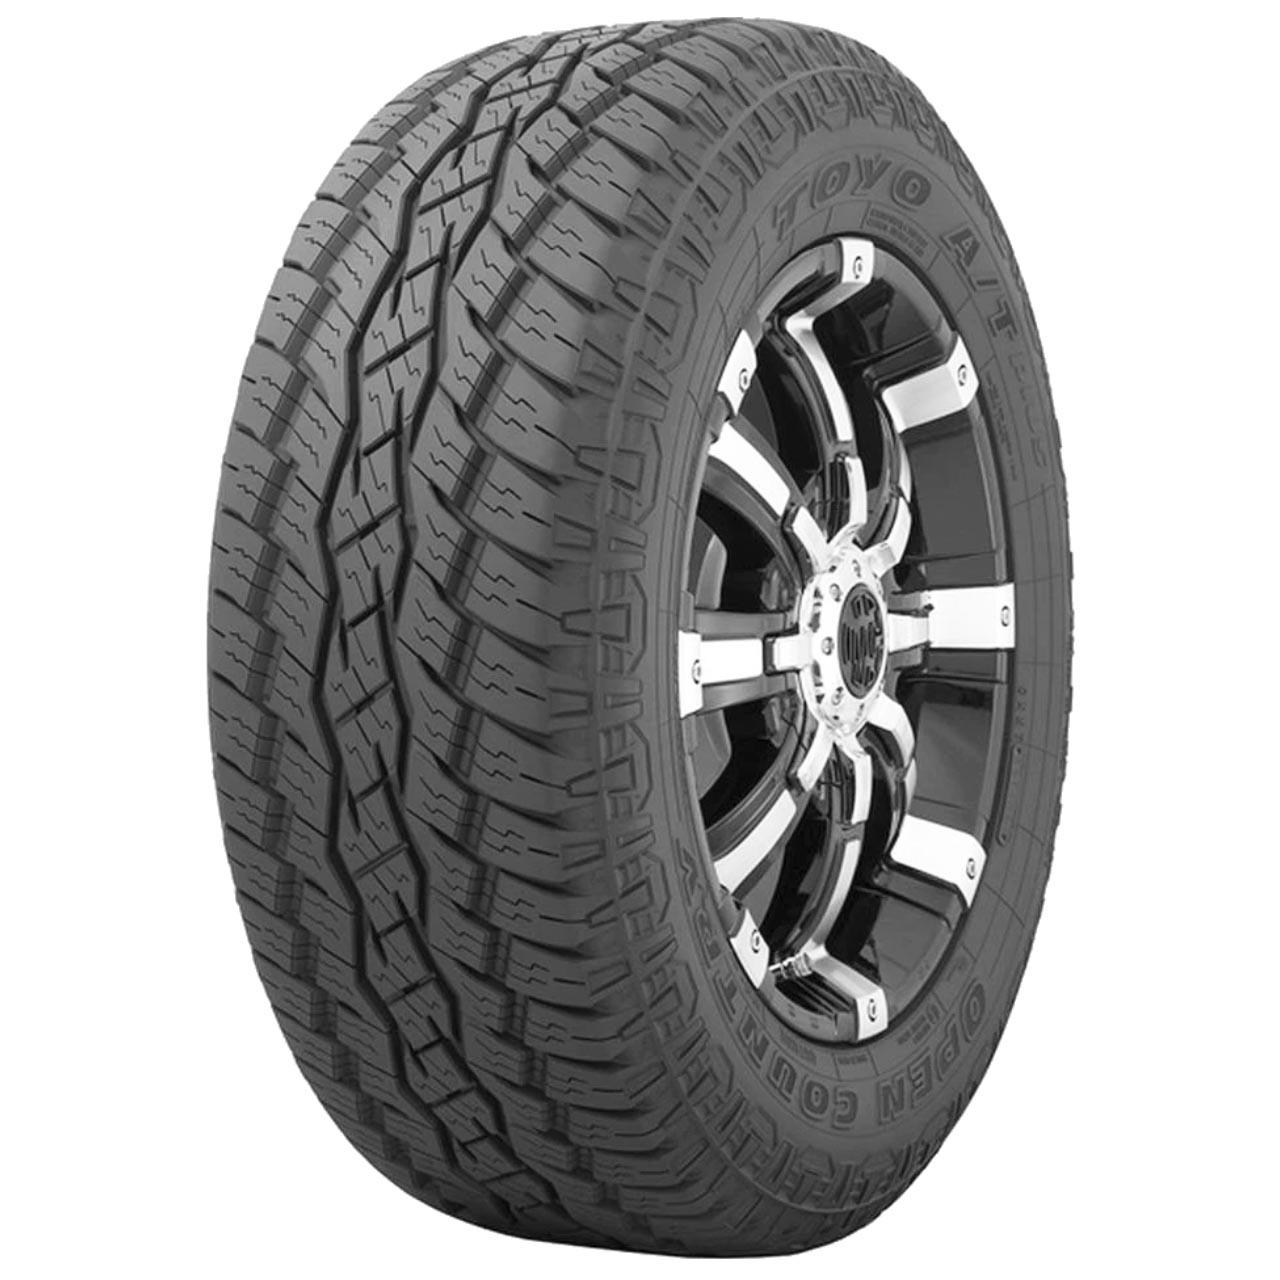 Toyo Open Country AT Plus 265/70R16 112H